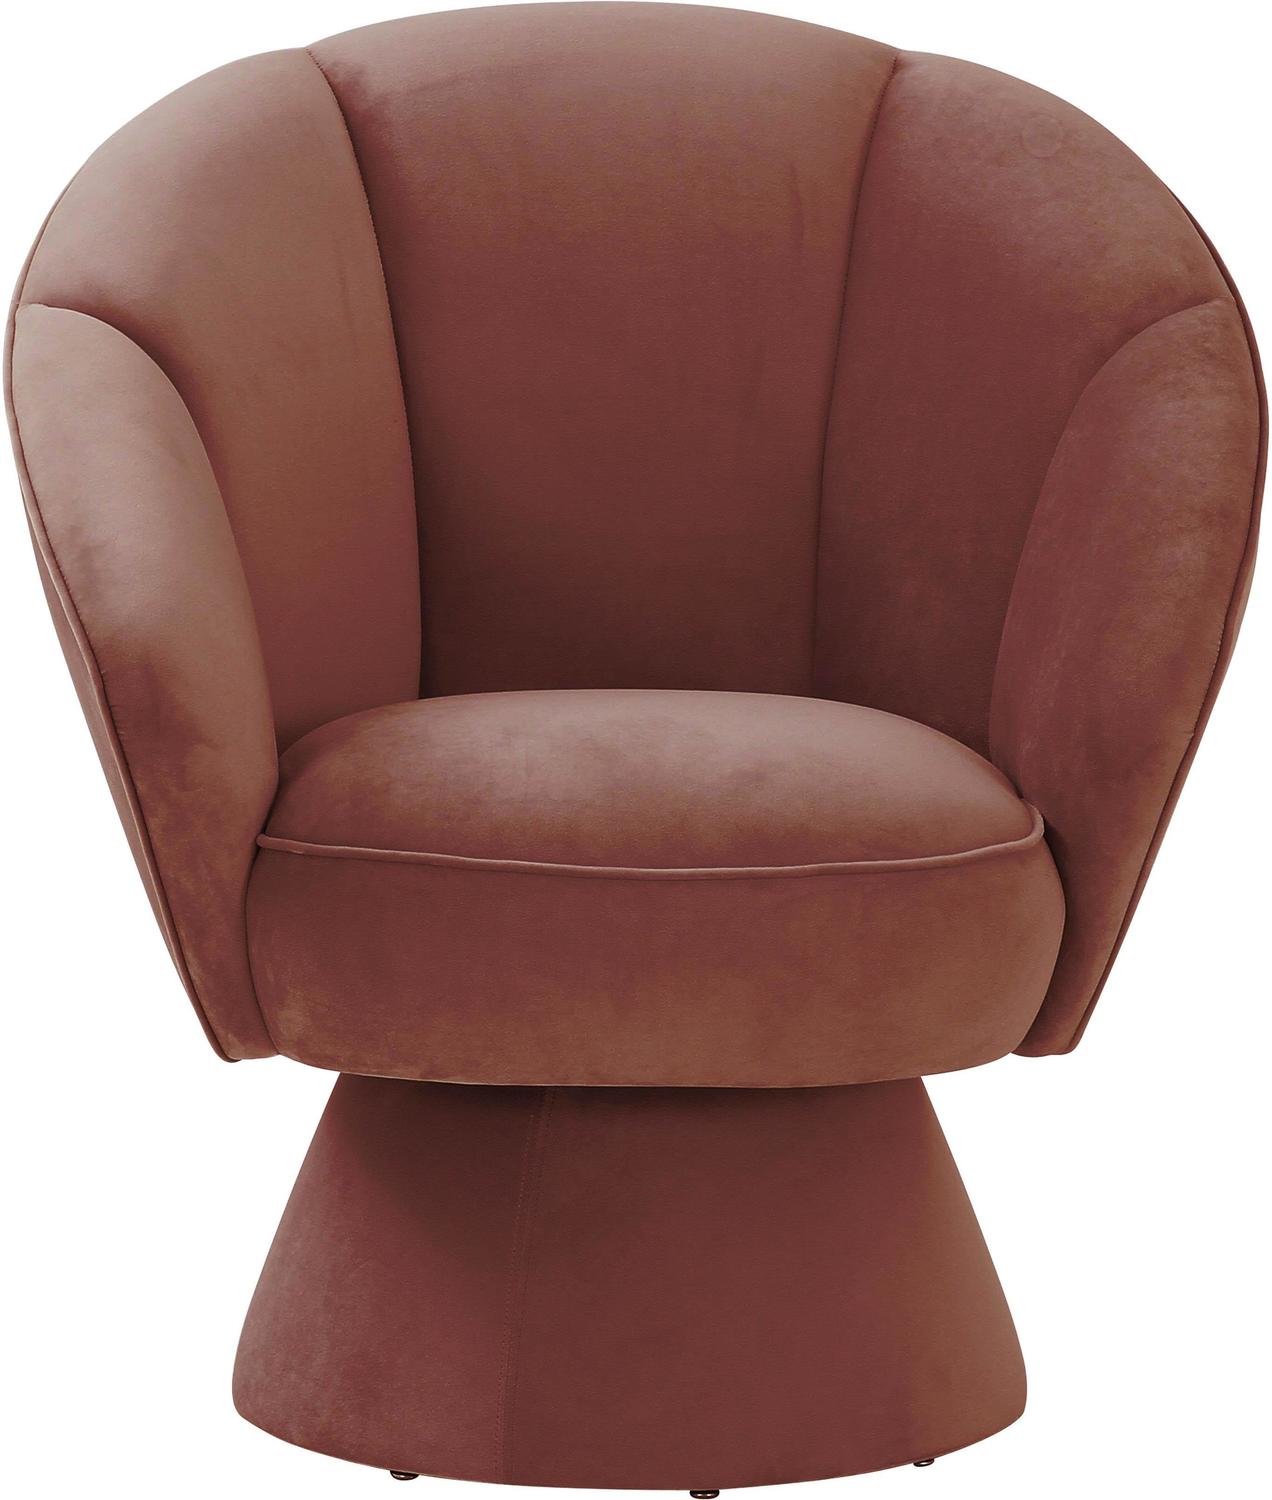 cheap accent chair with ottoman Contemporary Design Furniture Accent Chairs Salmon